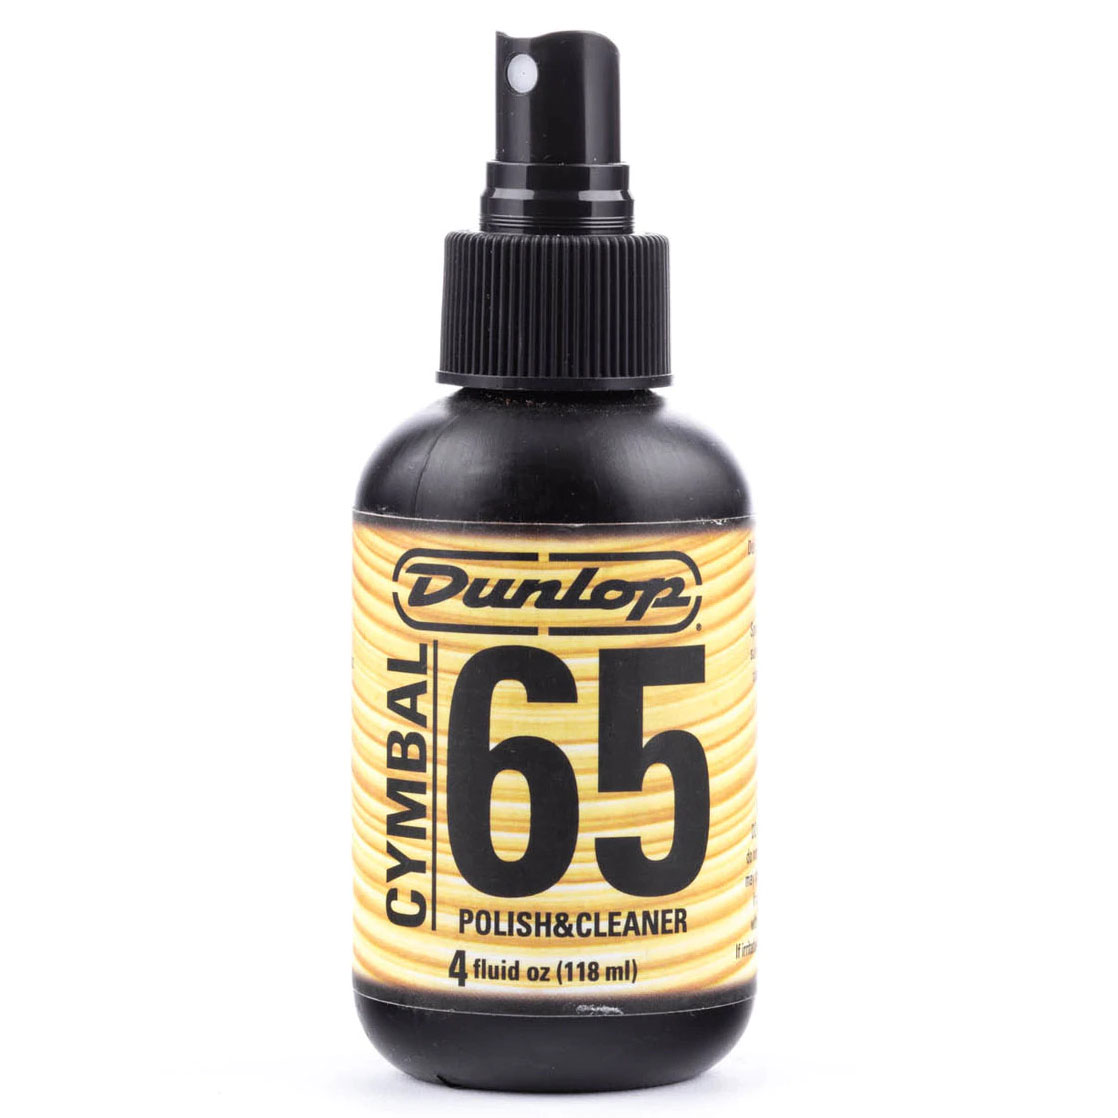    /   DUNLOP 6434 CYMBAL 65 CLEANER